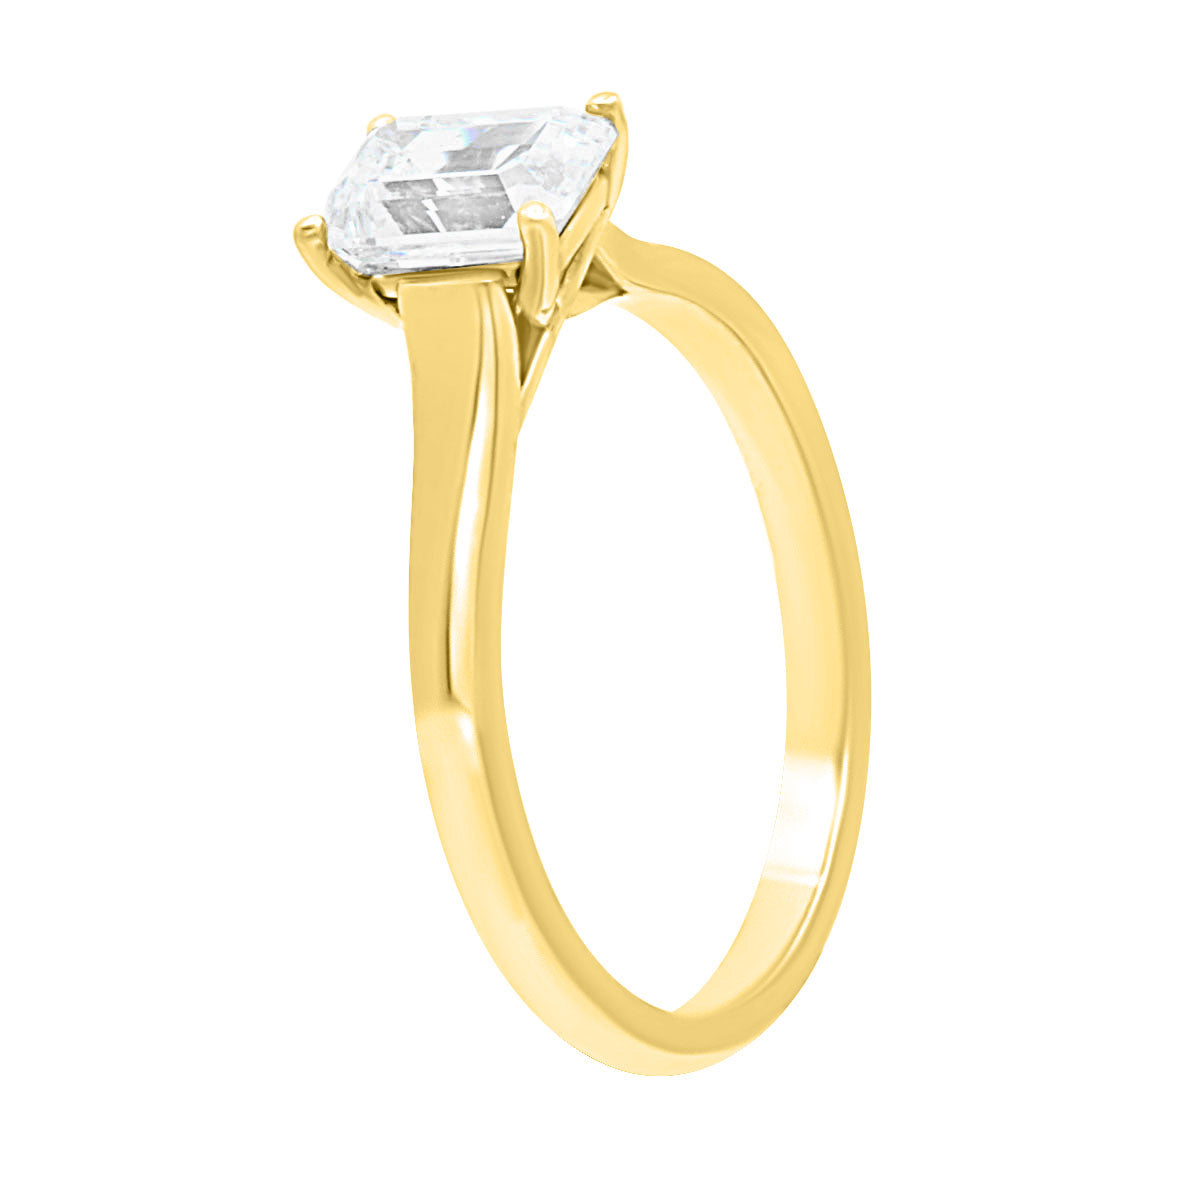 Emerald cut solitaire engagement ring IN Yellow Gold in an angled position